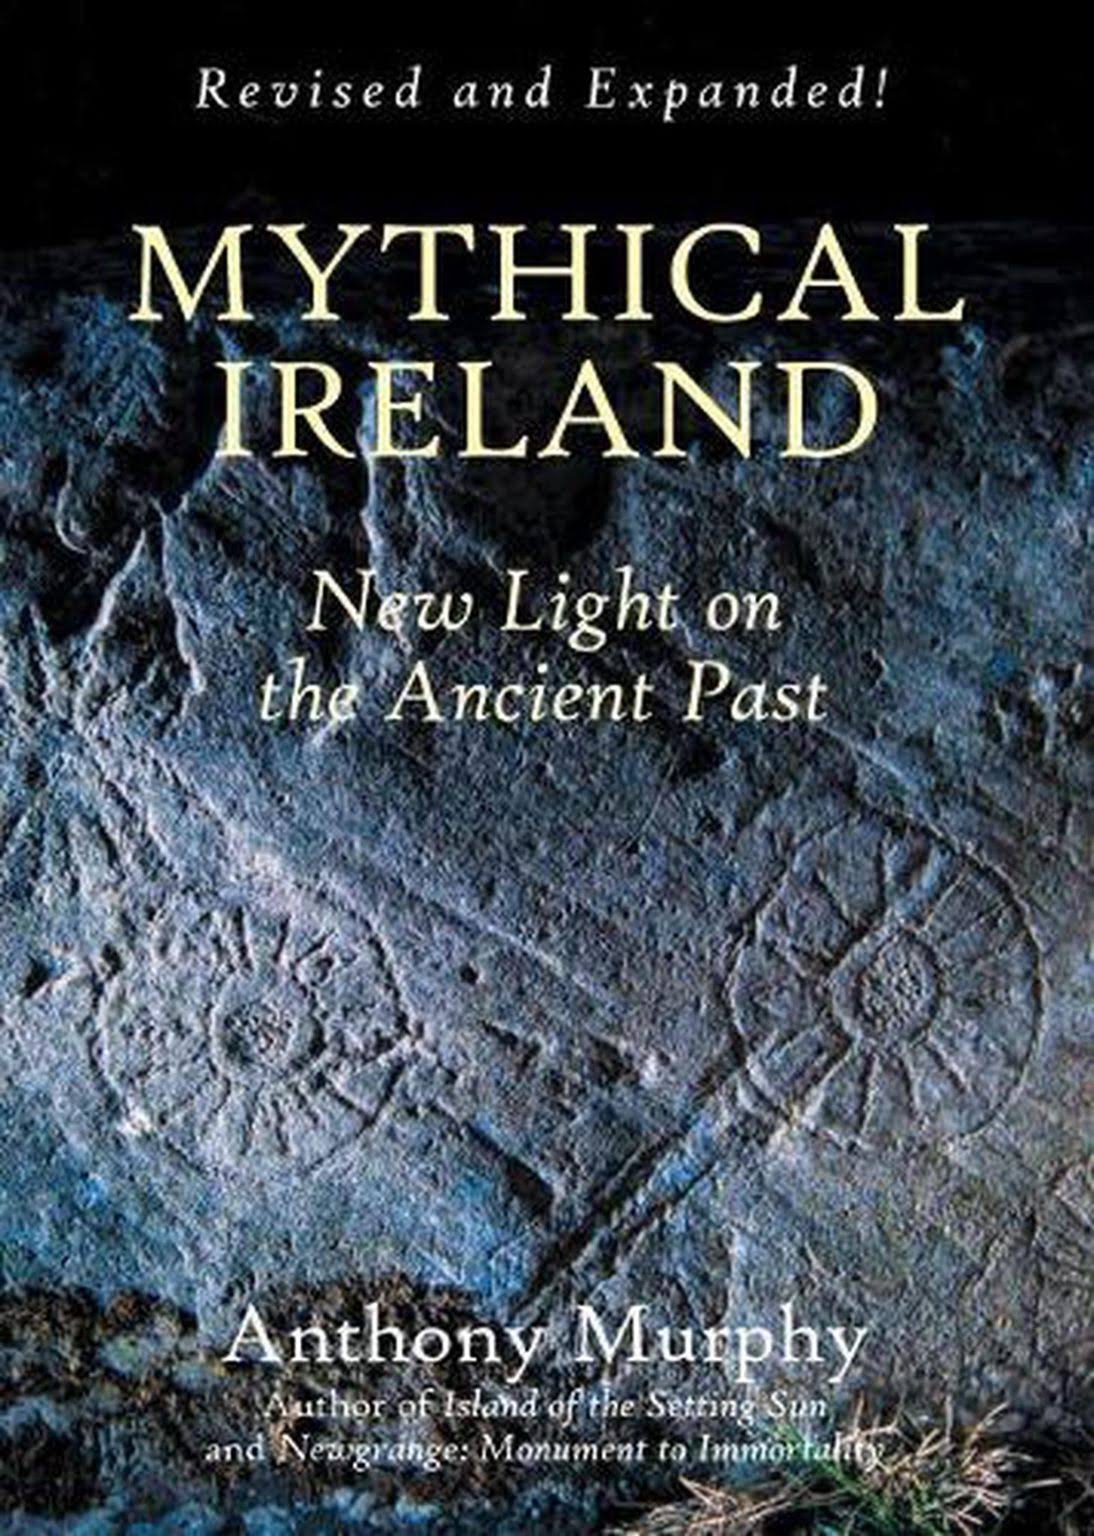 Mythical Ireland: New Light on the Ancient Past [Book]